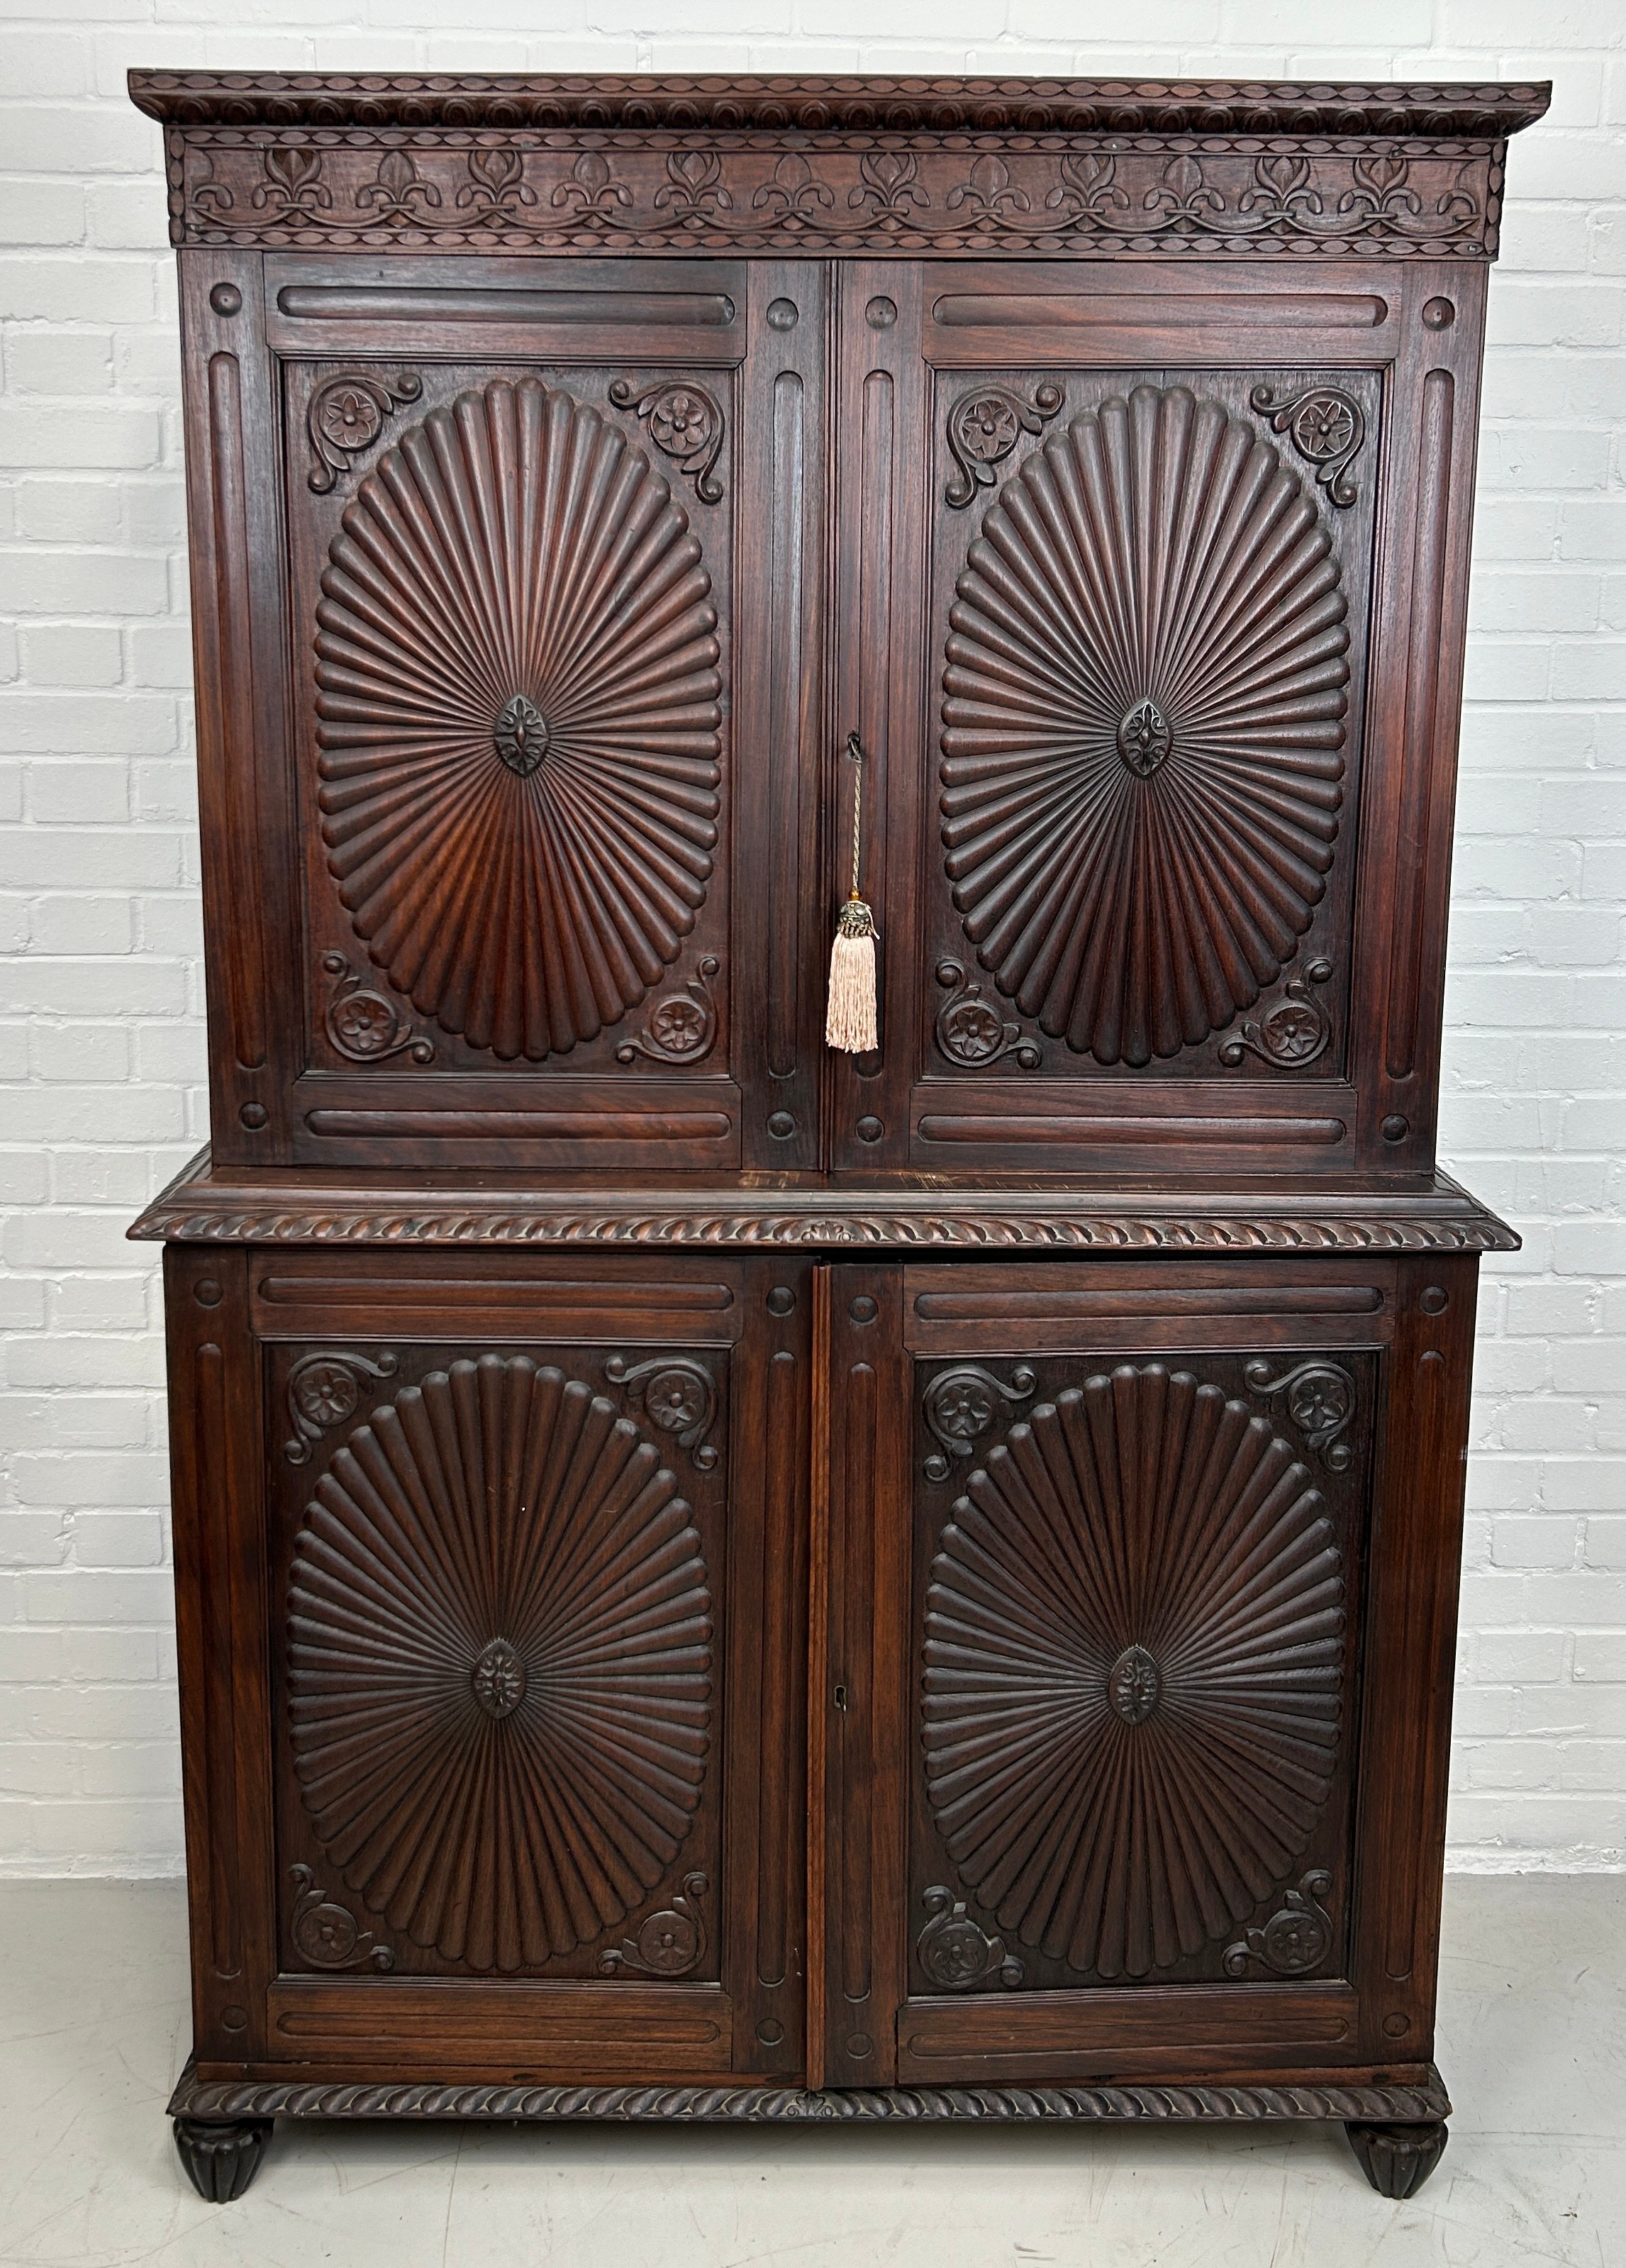 A 19TH CENTURY ANGLO INDIAN ROSEWOOD SECTIONAL WARDROBE WITH SUNBURST DESIGN PANELS, 194cm x 120cm x